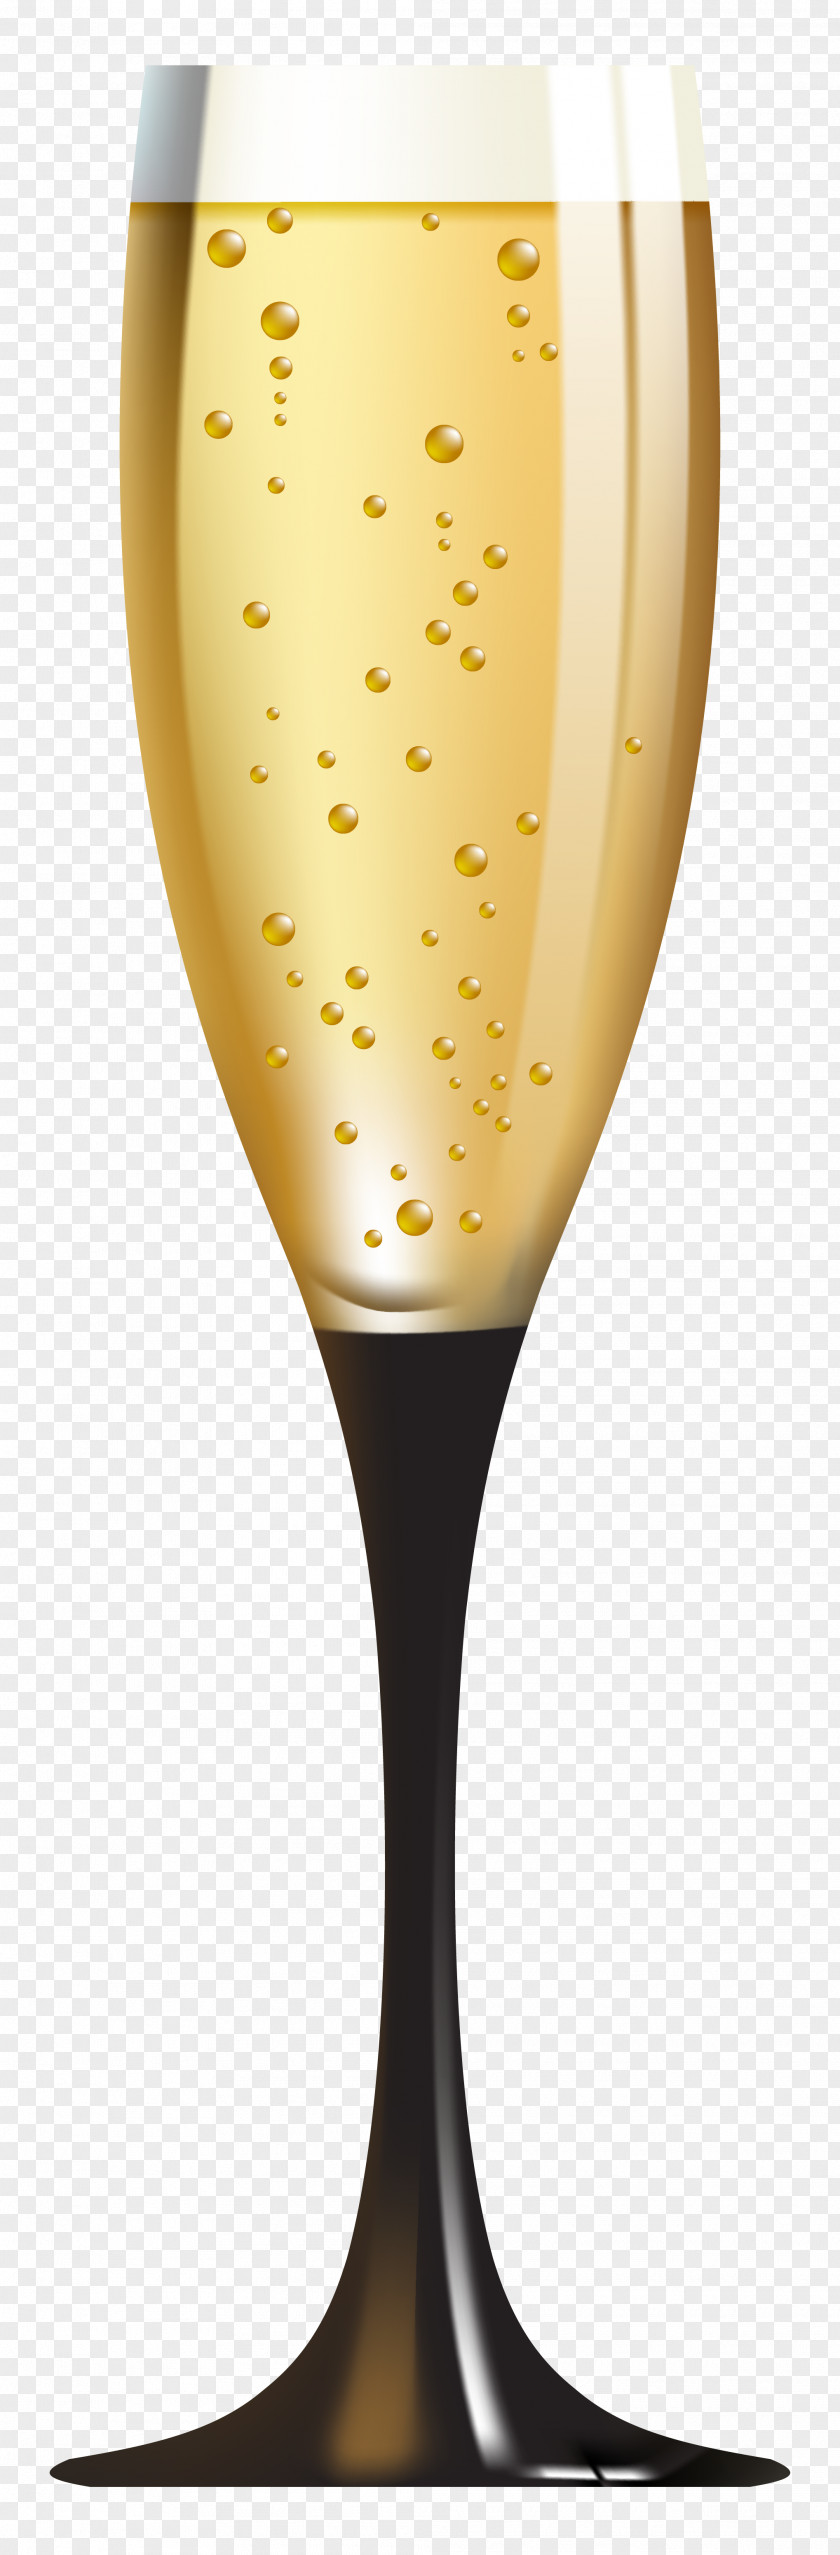 Glass Of Champagne Clipart Imag Cocktail Wine Martini PNG